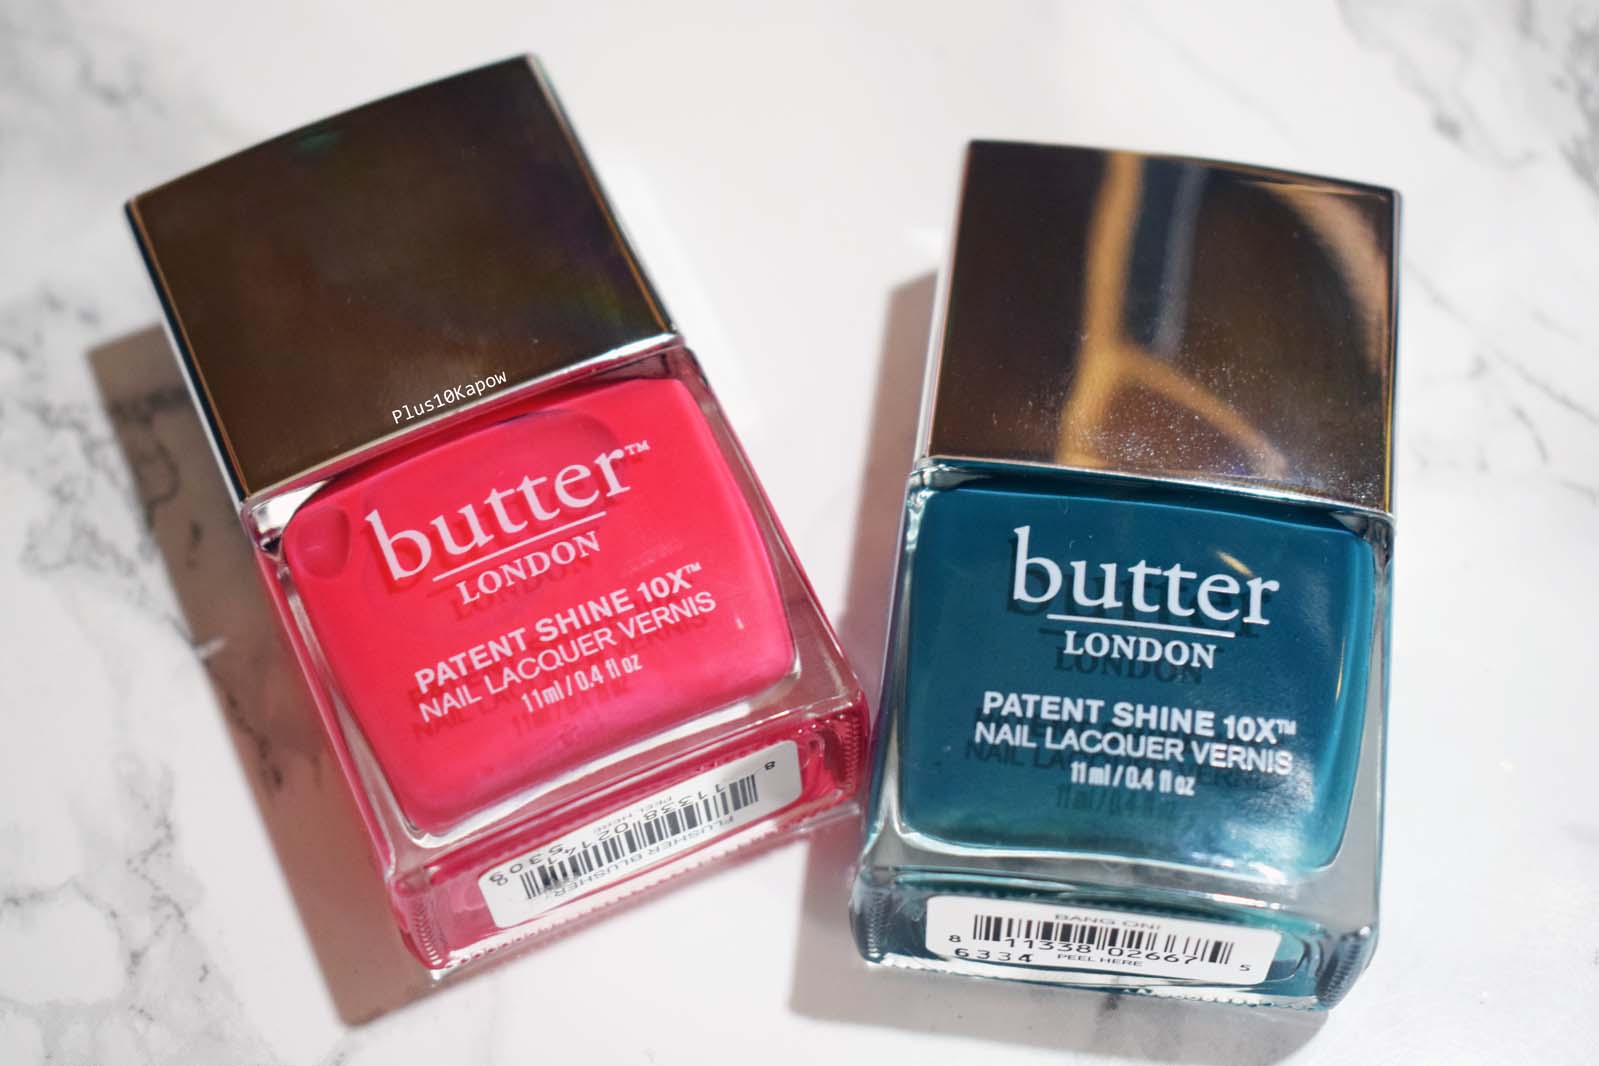 7. Butter London Patent Shine 10X Nail Lacquer in "Fruit Machine" - wide 6